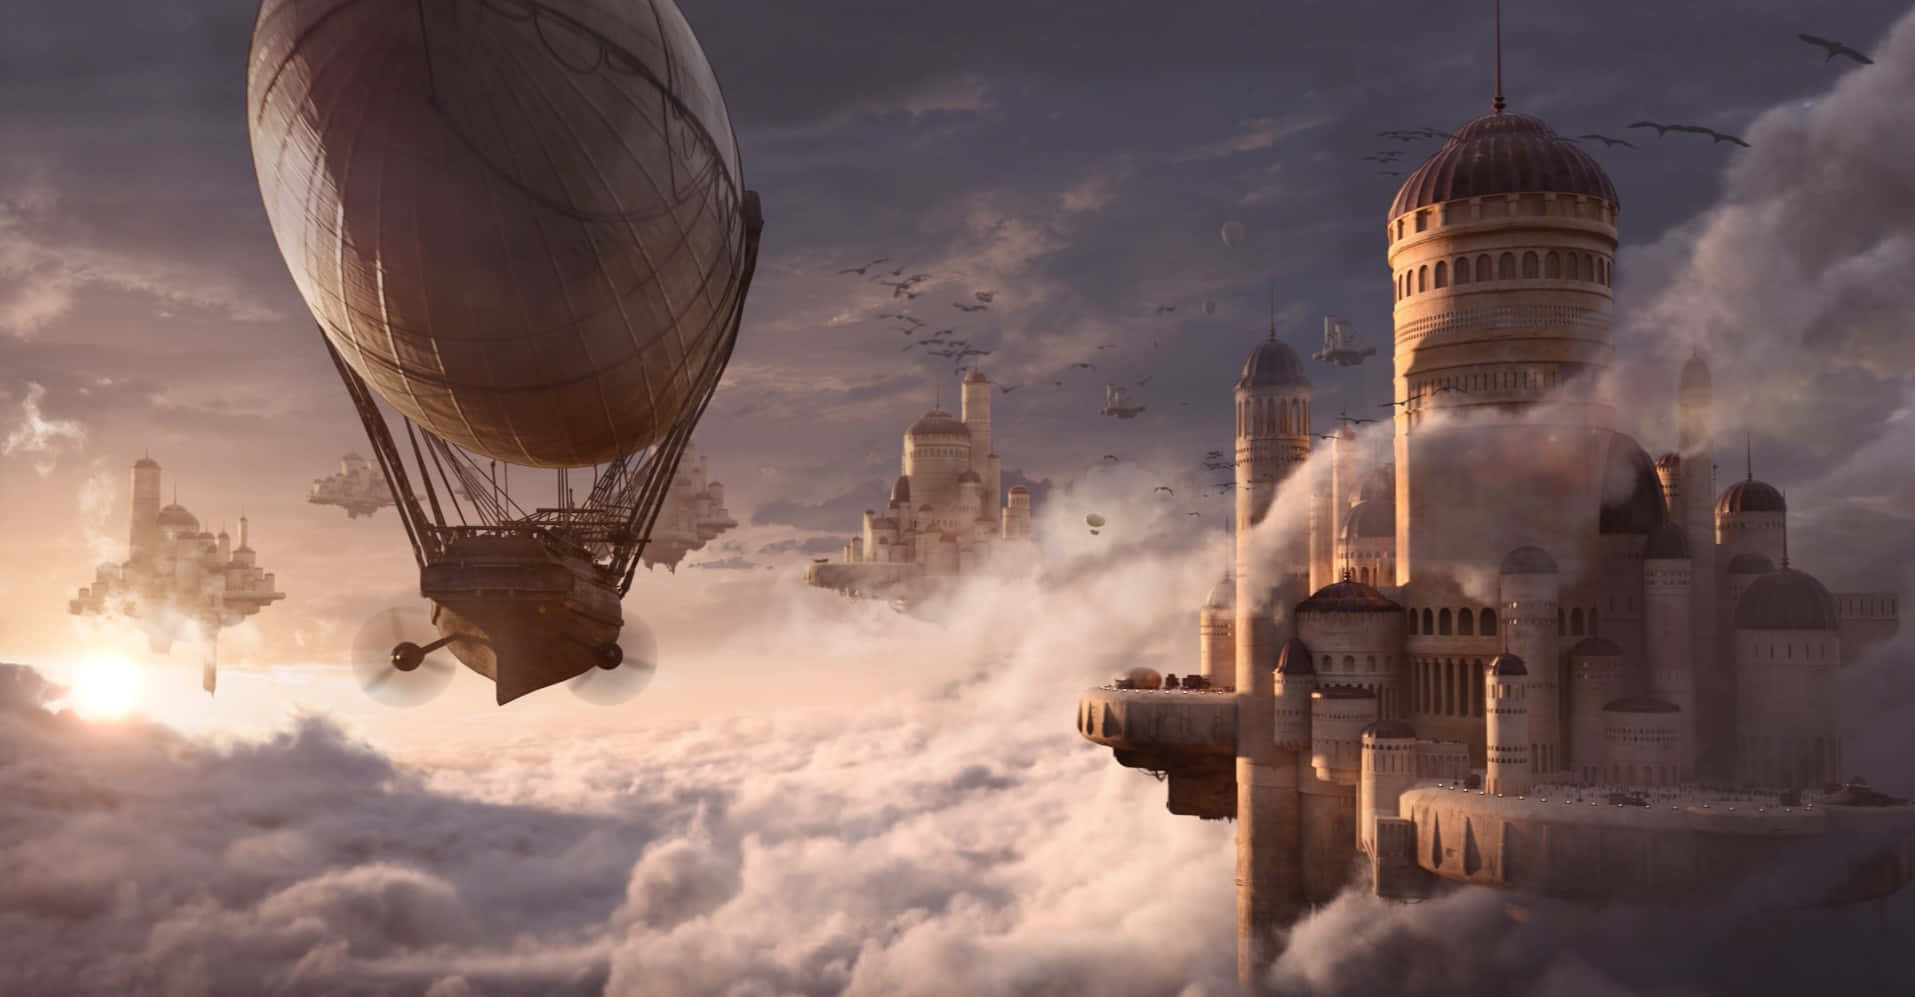 A breathtaking view of the "Castle In The Sky". Wallpaper